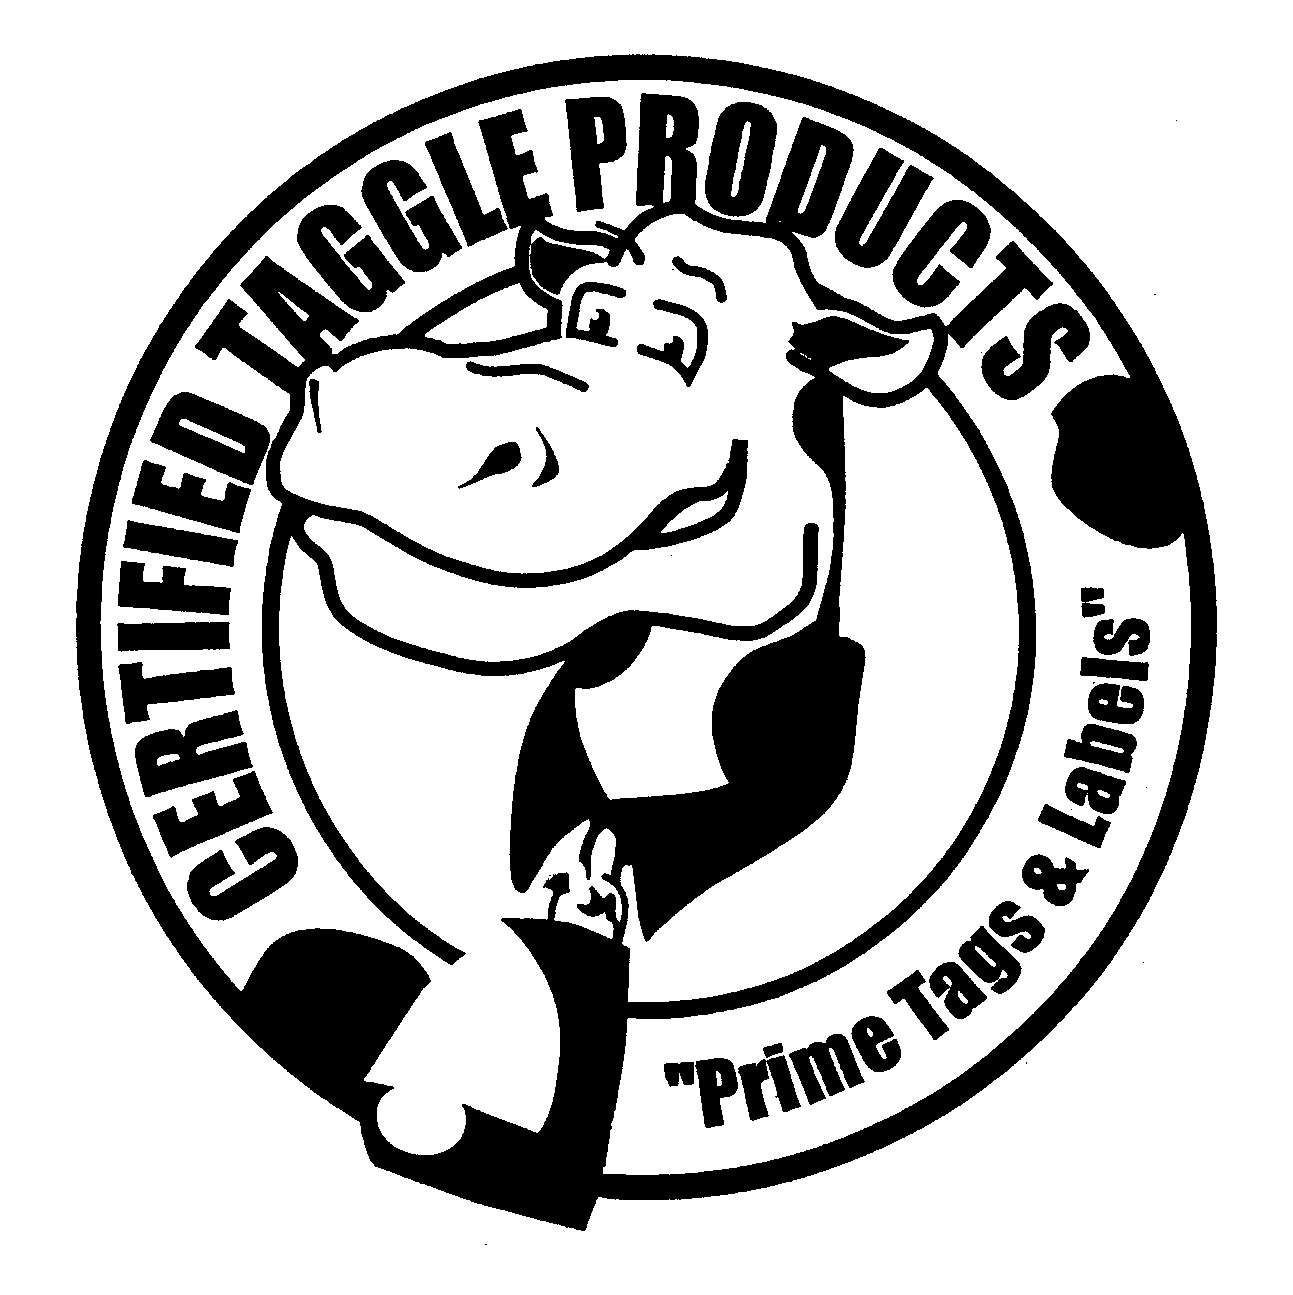  CERTIFIED TAGGLE PRODUCTS &quot;PRIME TAGS AND LABELS&quot;